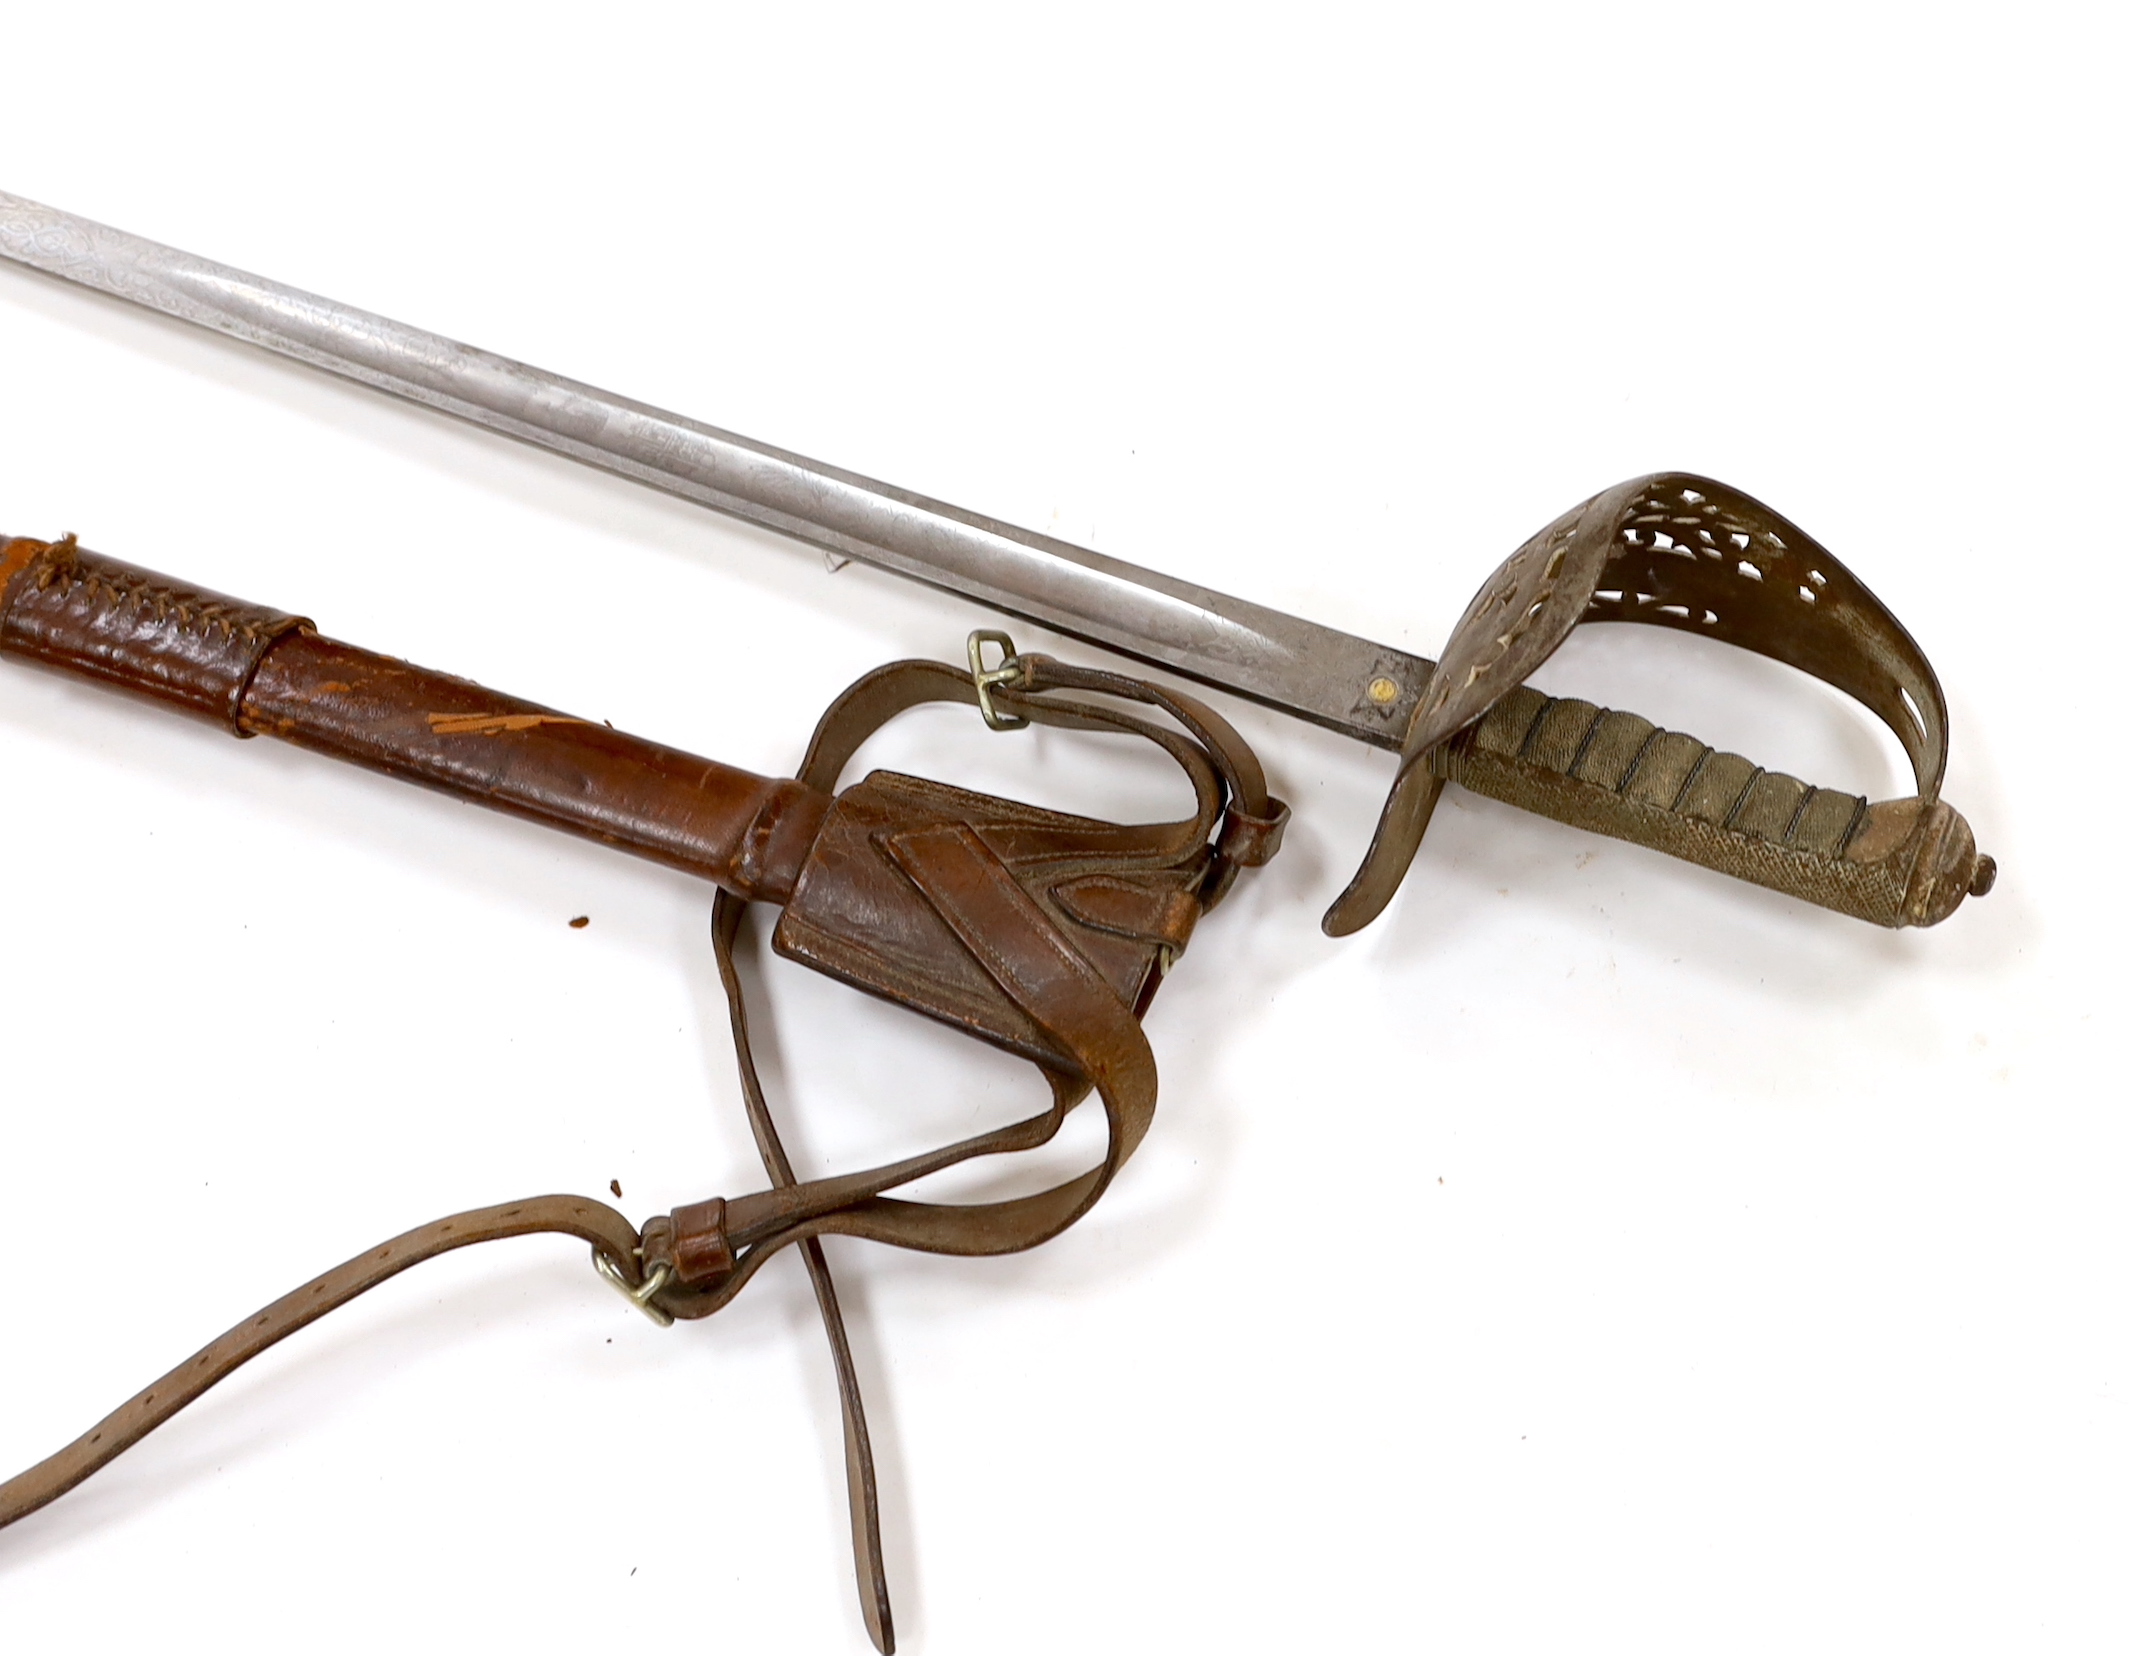 A Victorian 1897 pattern infantry officer's sword, maker Robert Mole & Sons, Birmingham, marked War and India offices, with scabbard and leather hanger, blade 82cm